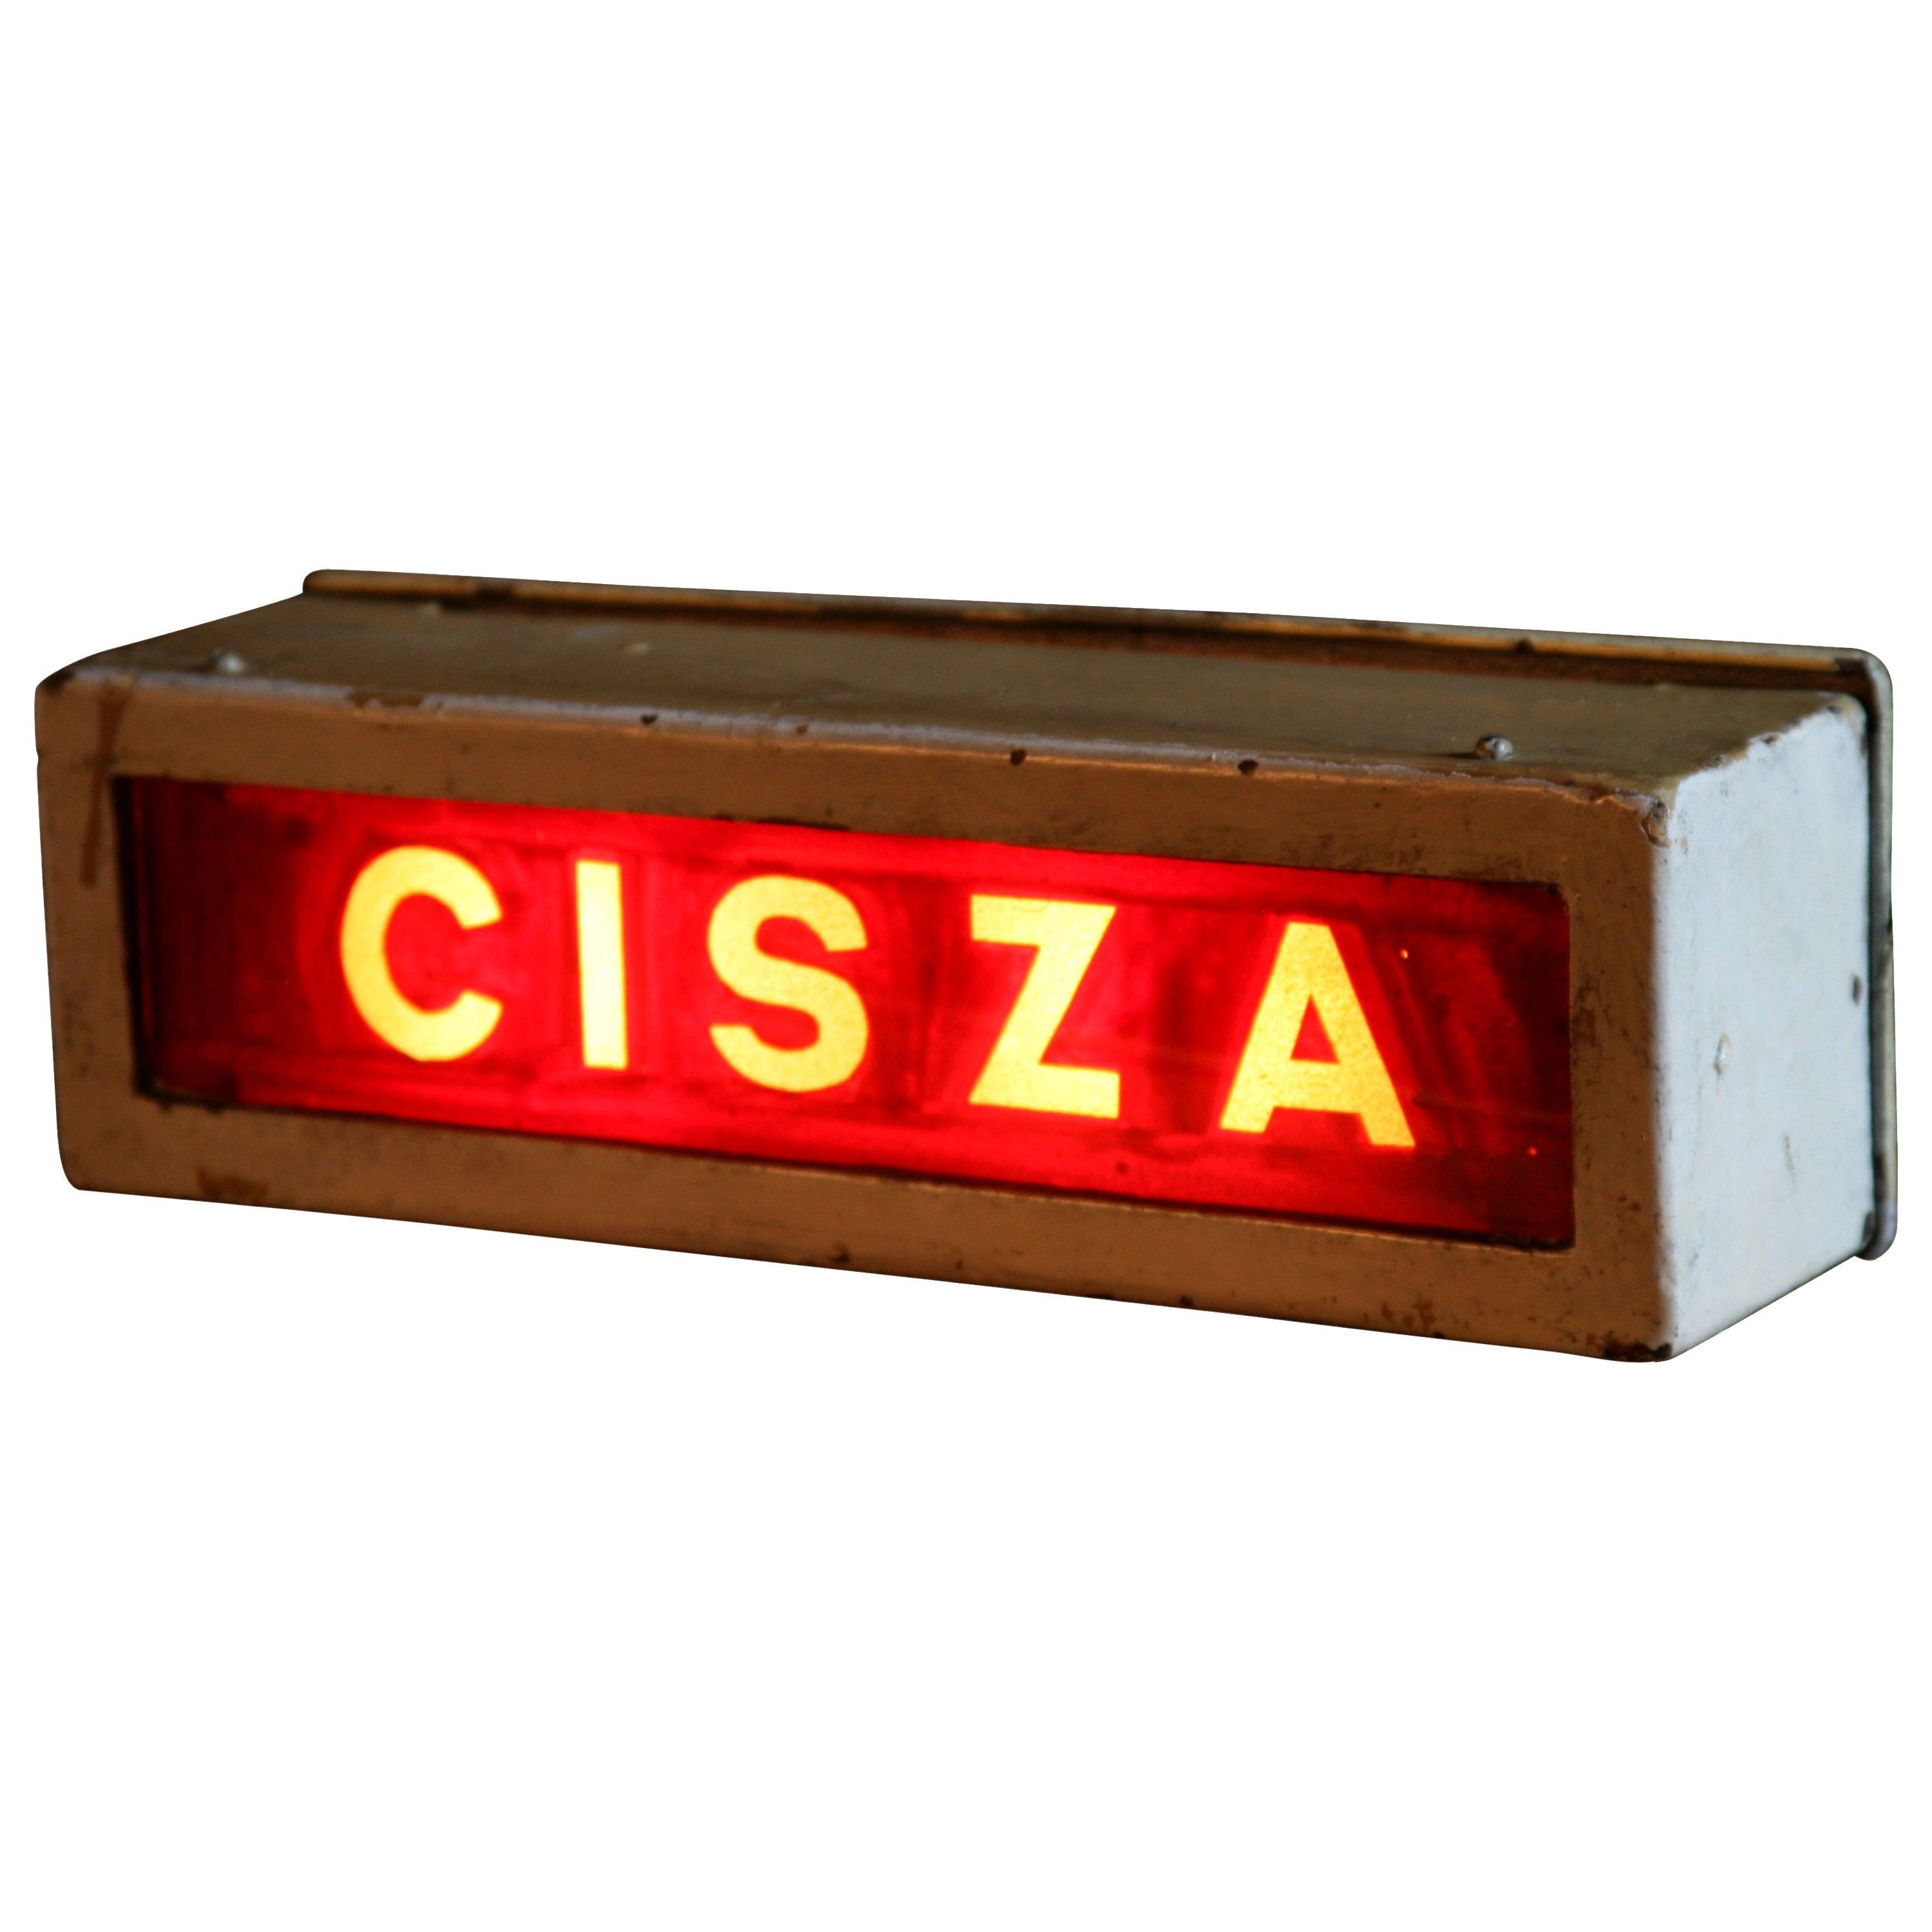 1950s Illuminated Theater Sign “Cisza”, Meaning “Silence” For Sale